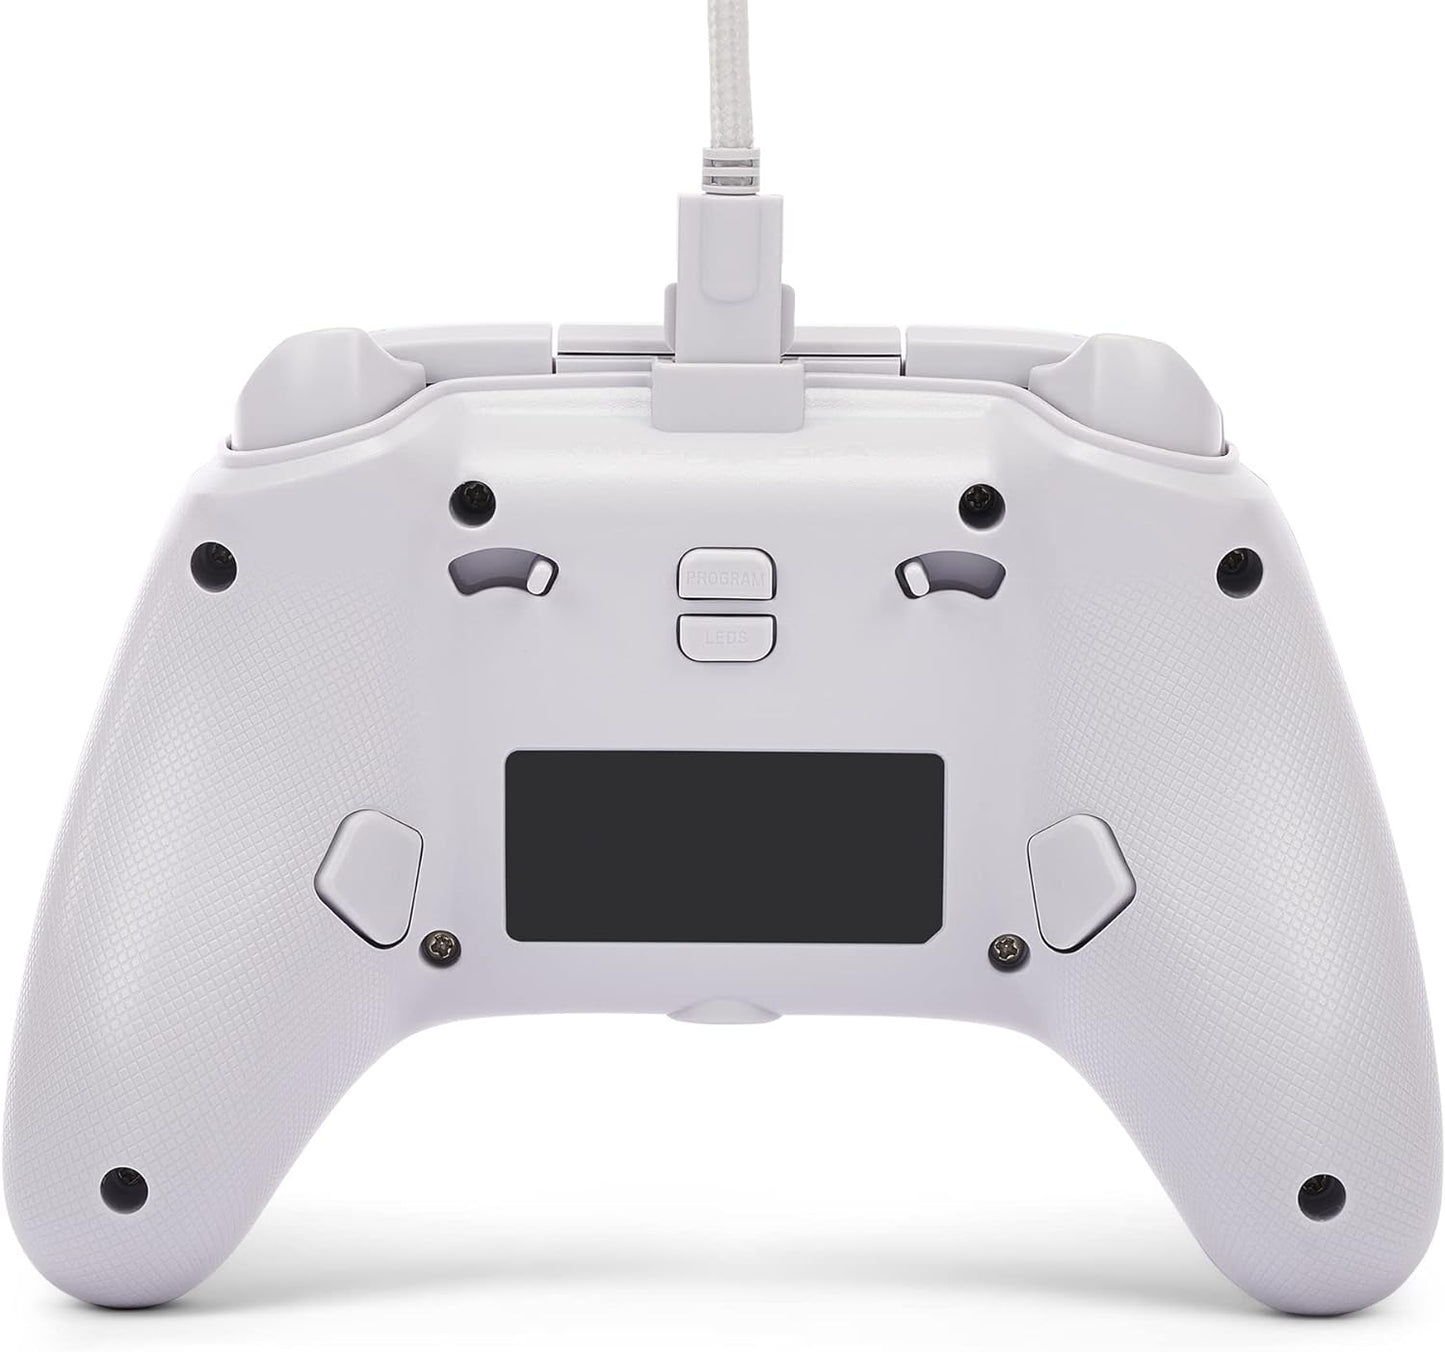 PowerA Spectra Infinity Enhanced Wired Controller PC and Xbox Gamepad White - WebDuke Computers